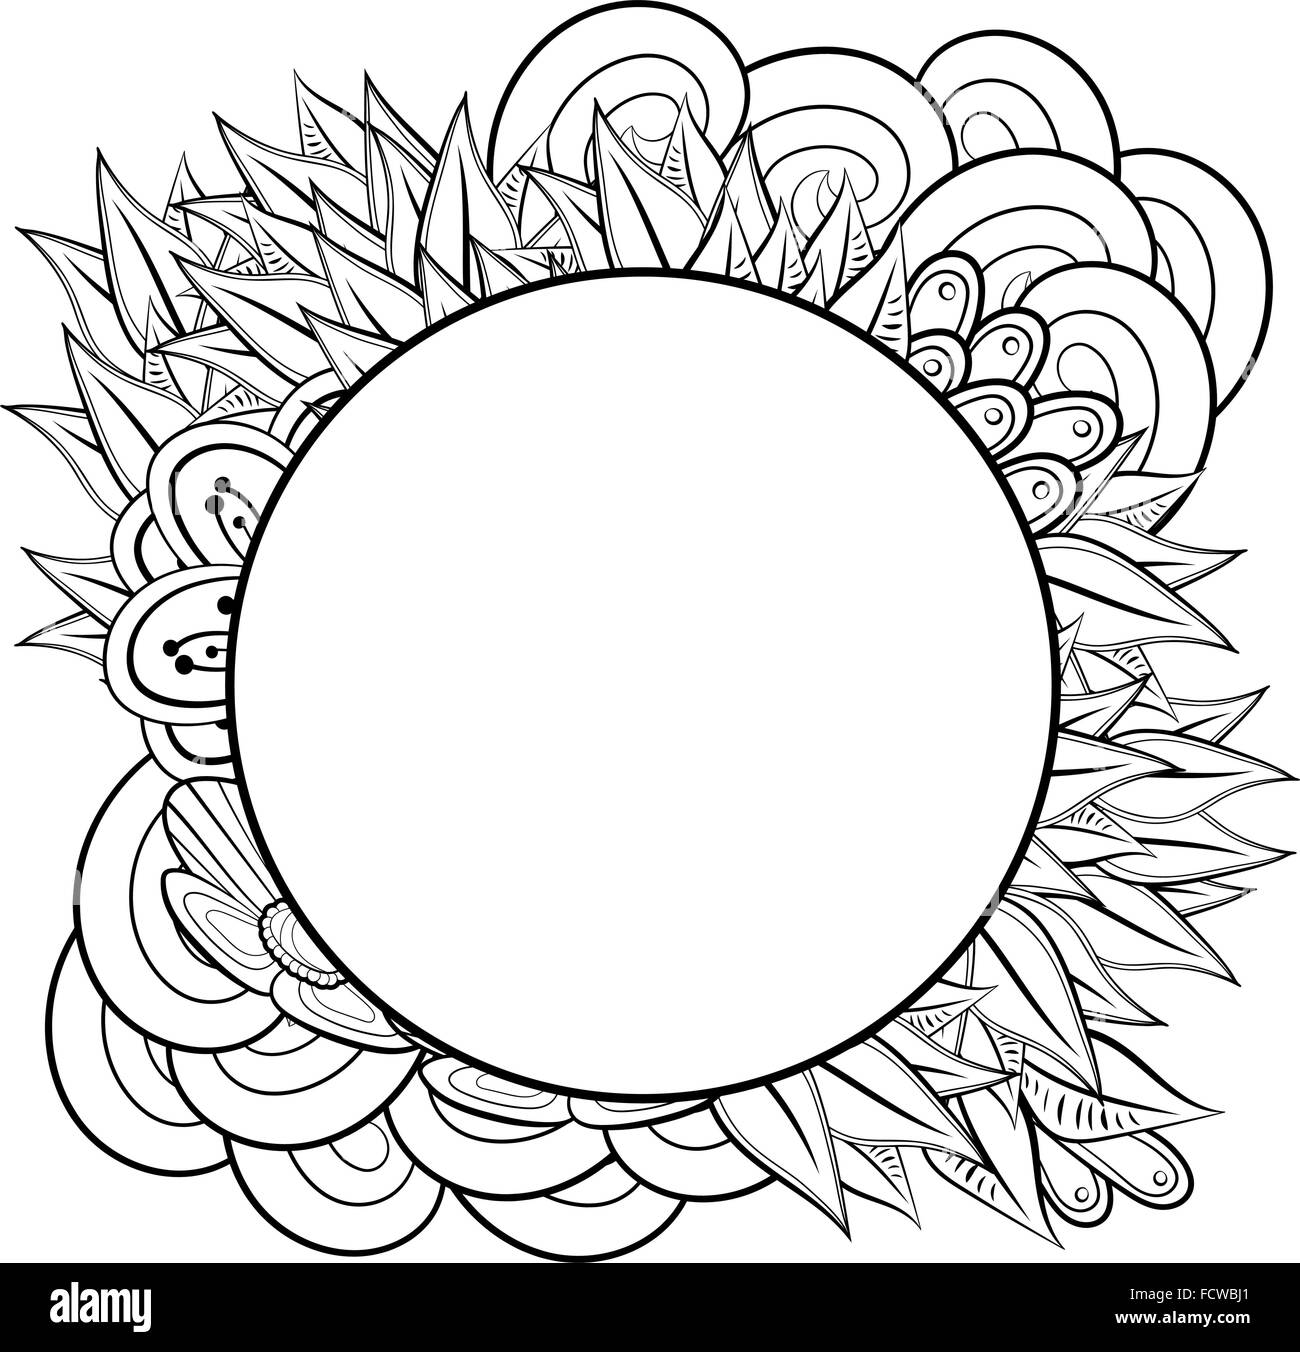 Vector floral round frame. Ethnic retro design in zentangle style with flowers and abstract elements Stock Vector